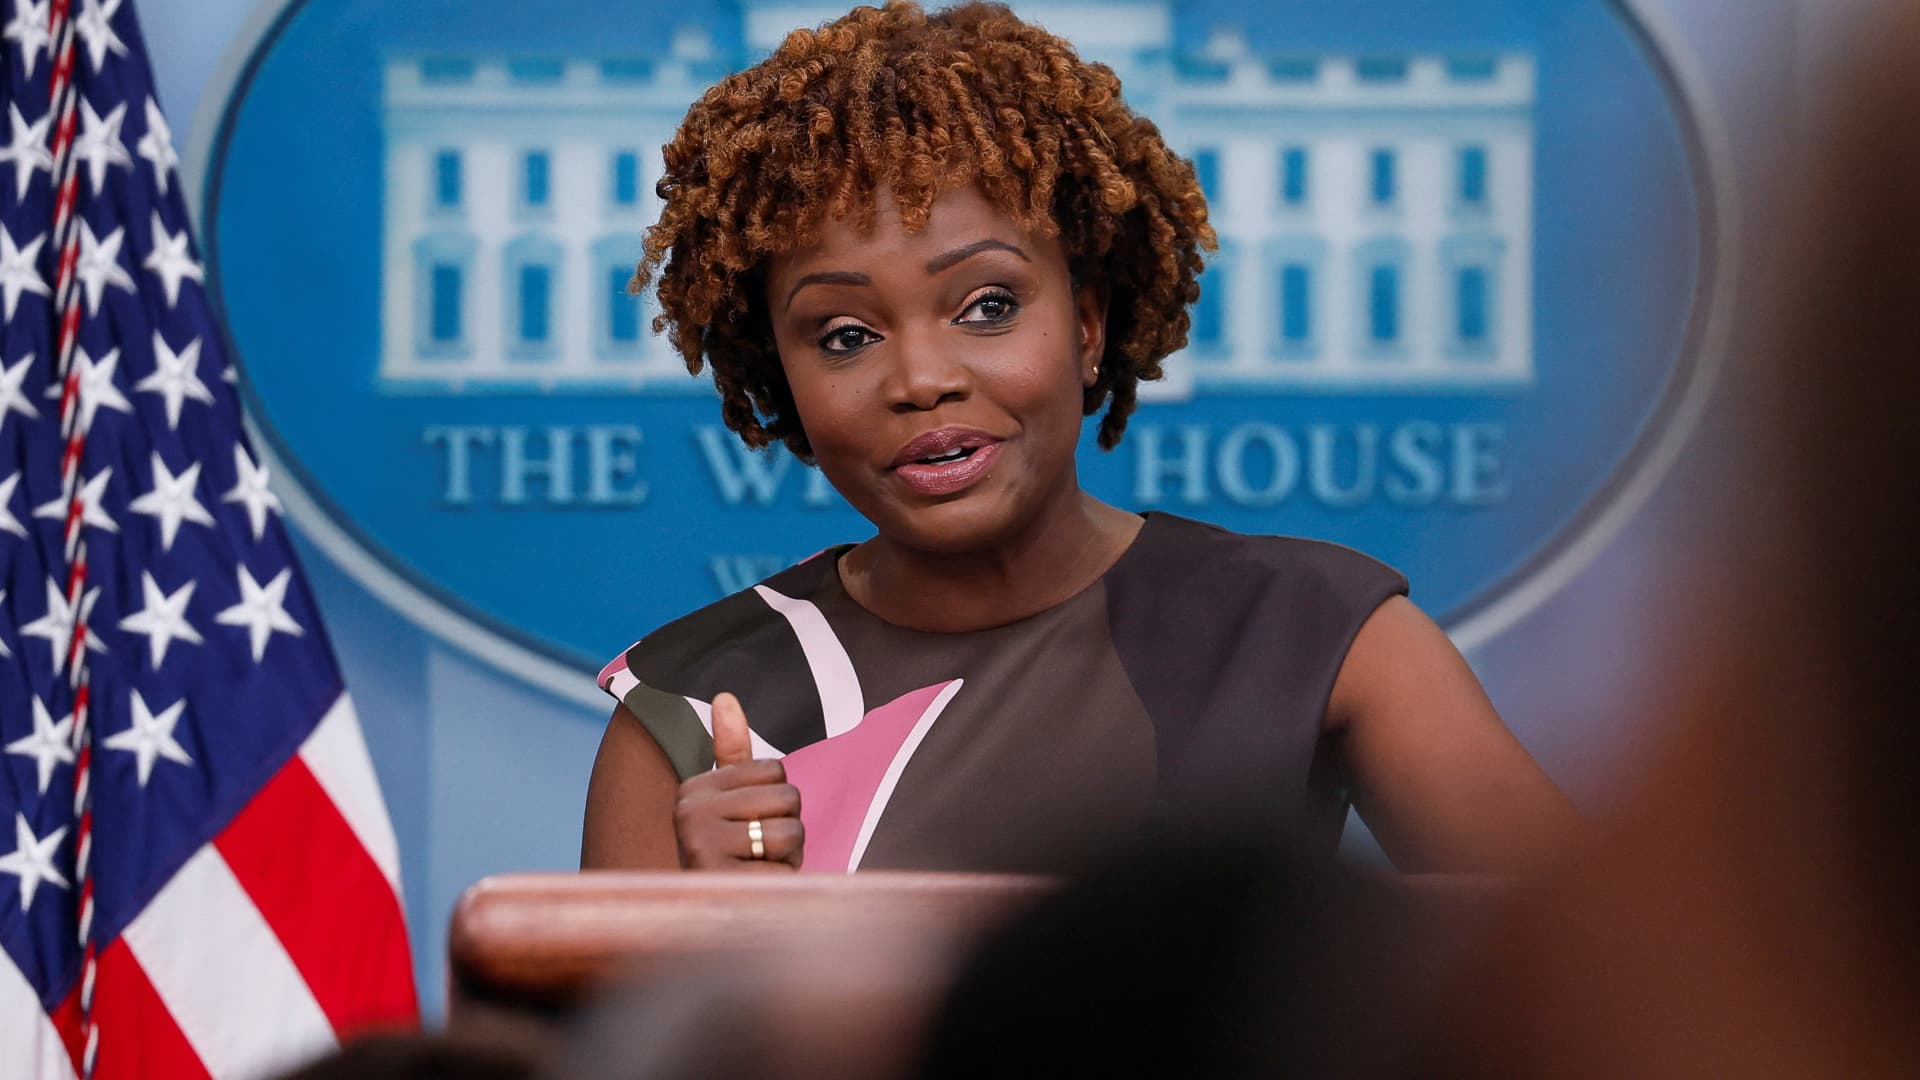 White House Press Secretary Karine Jean-Pierre answers questions during the daily press briefing at the White House in Washington, August 9, 2022.